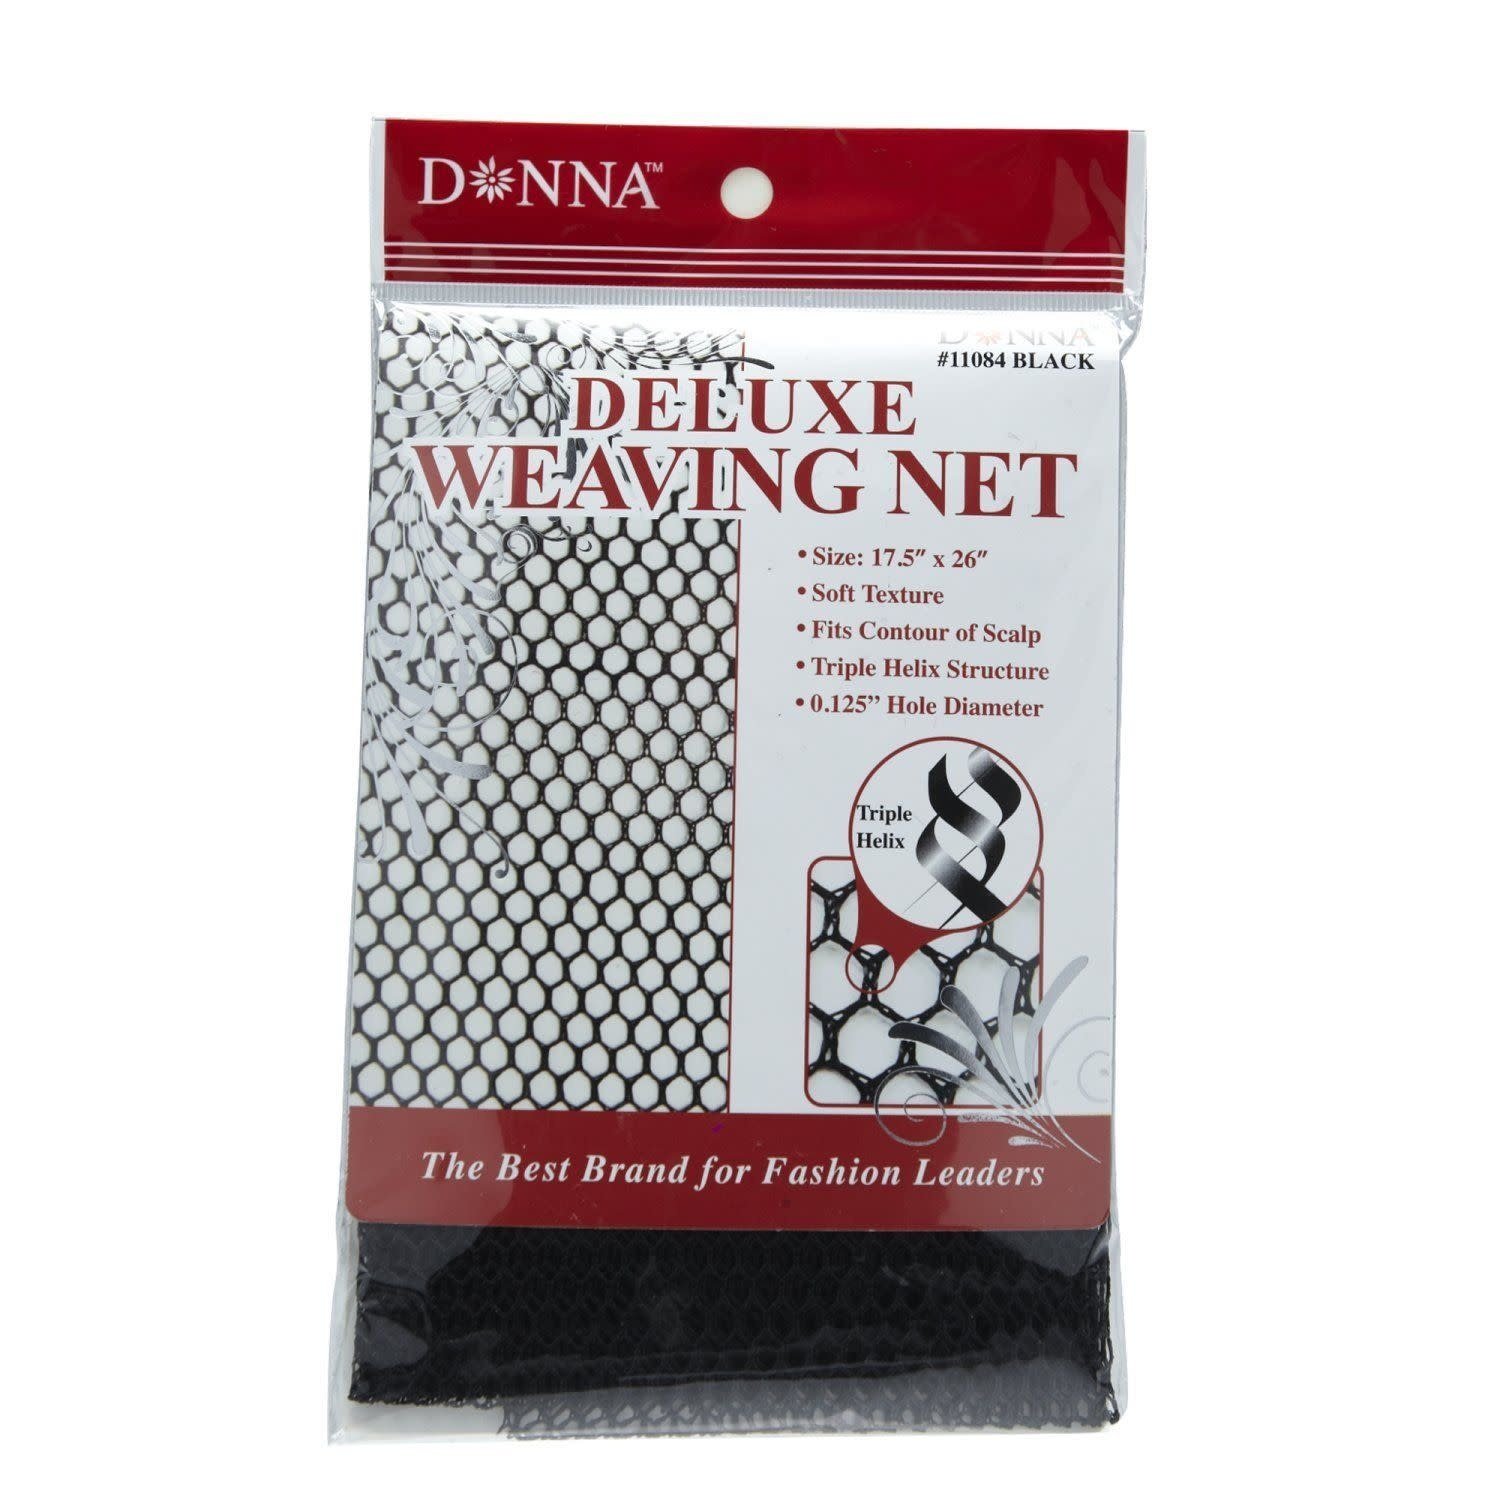 Donna Deluxe Weaving Net 11084 - PRINCESSA Beauty Products